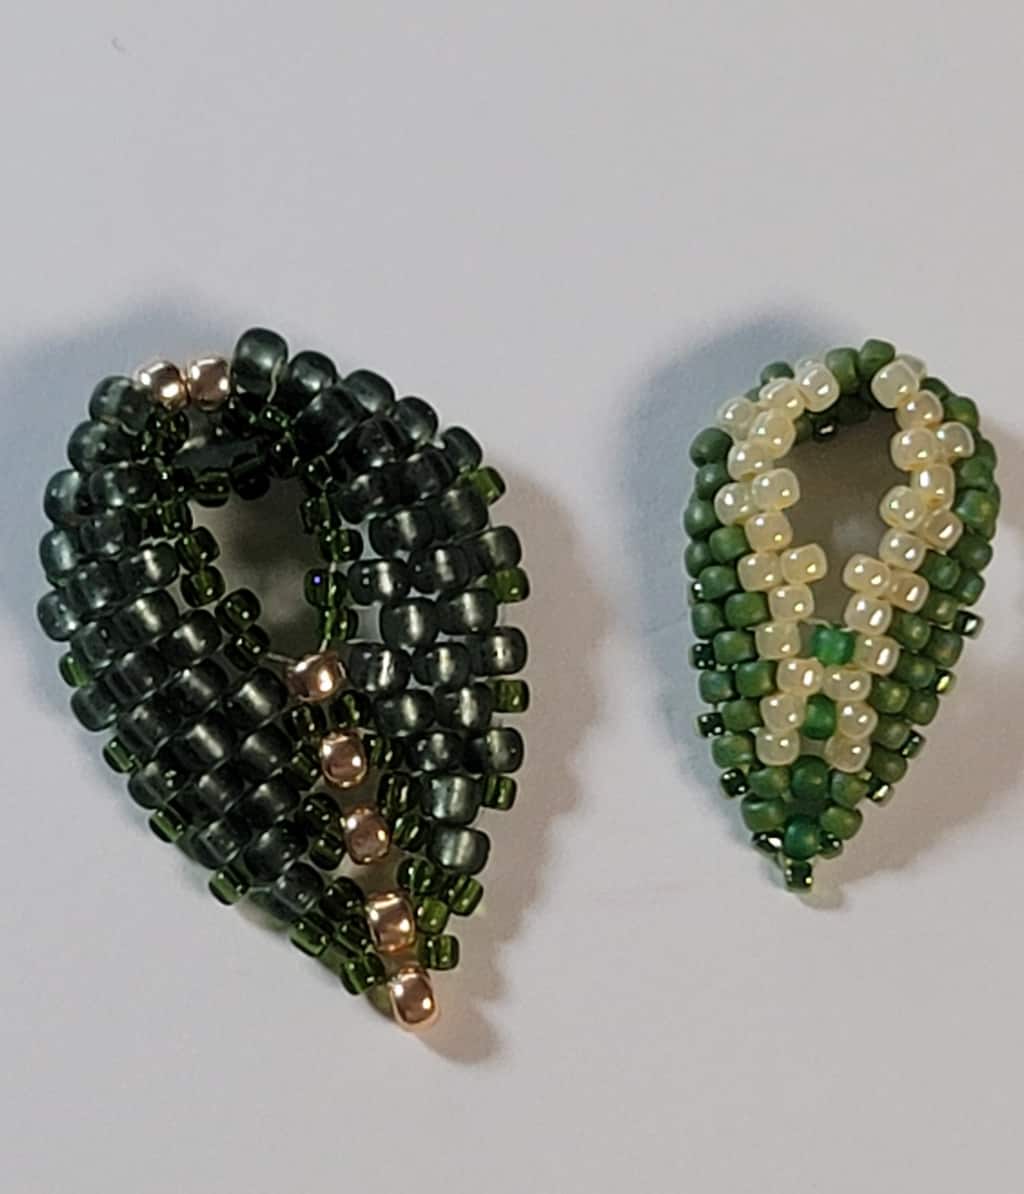 How to Make Bead and Wire Leaves Tutorials / The Beading Gem